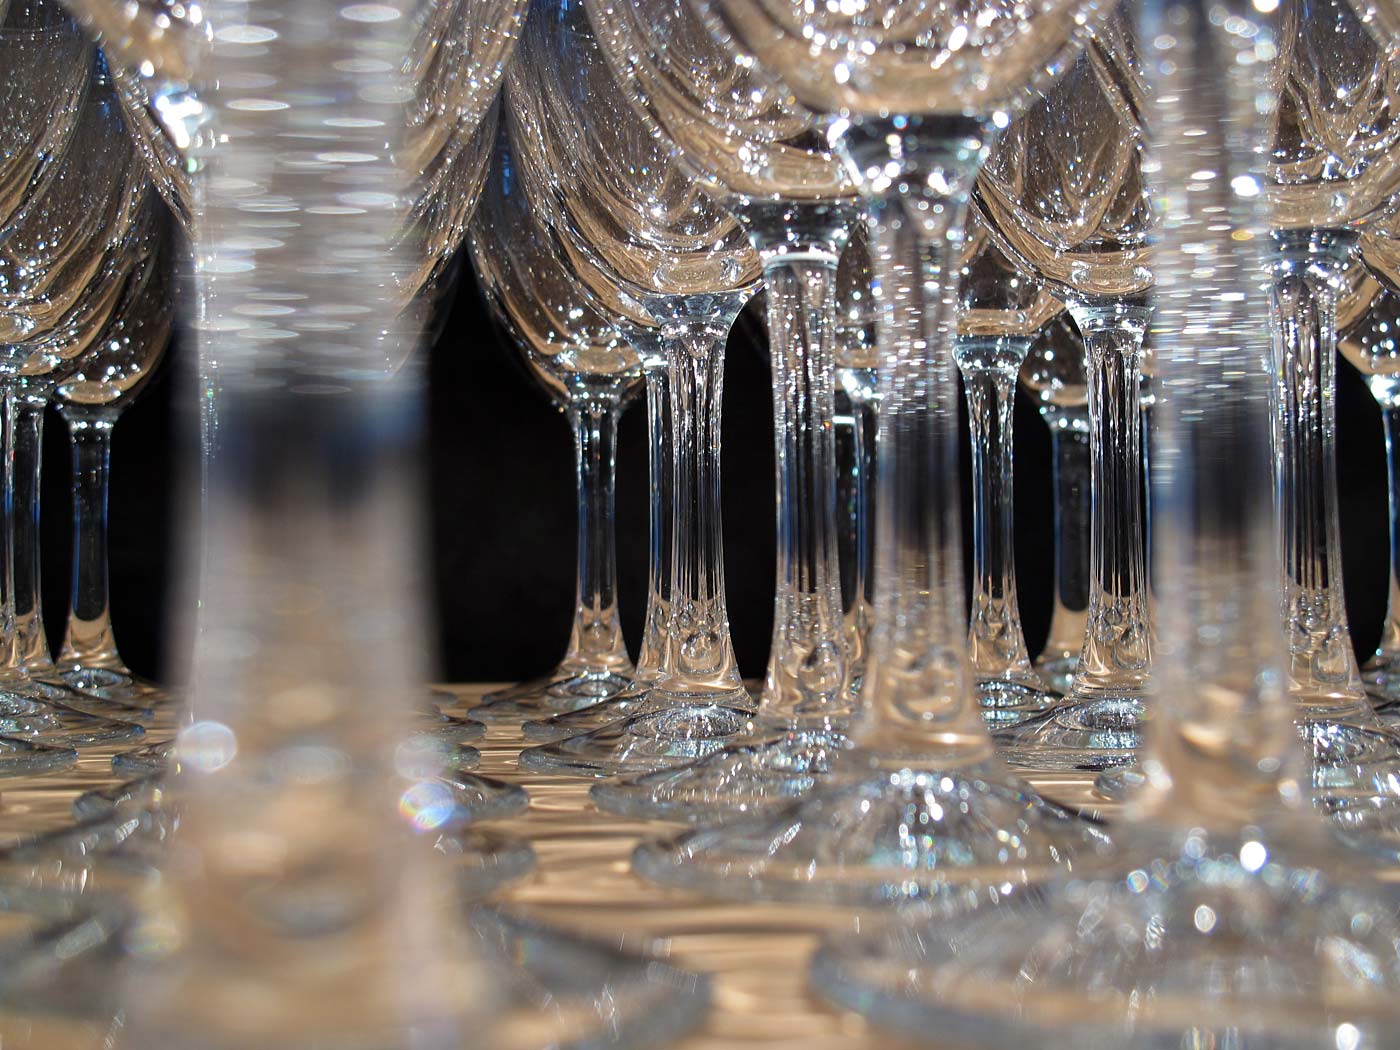 Reykjavík. Wine glasses during an opening event. - III. (19 January 2013)